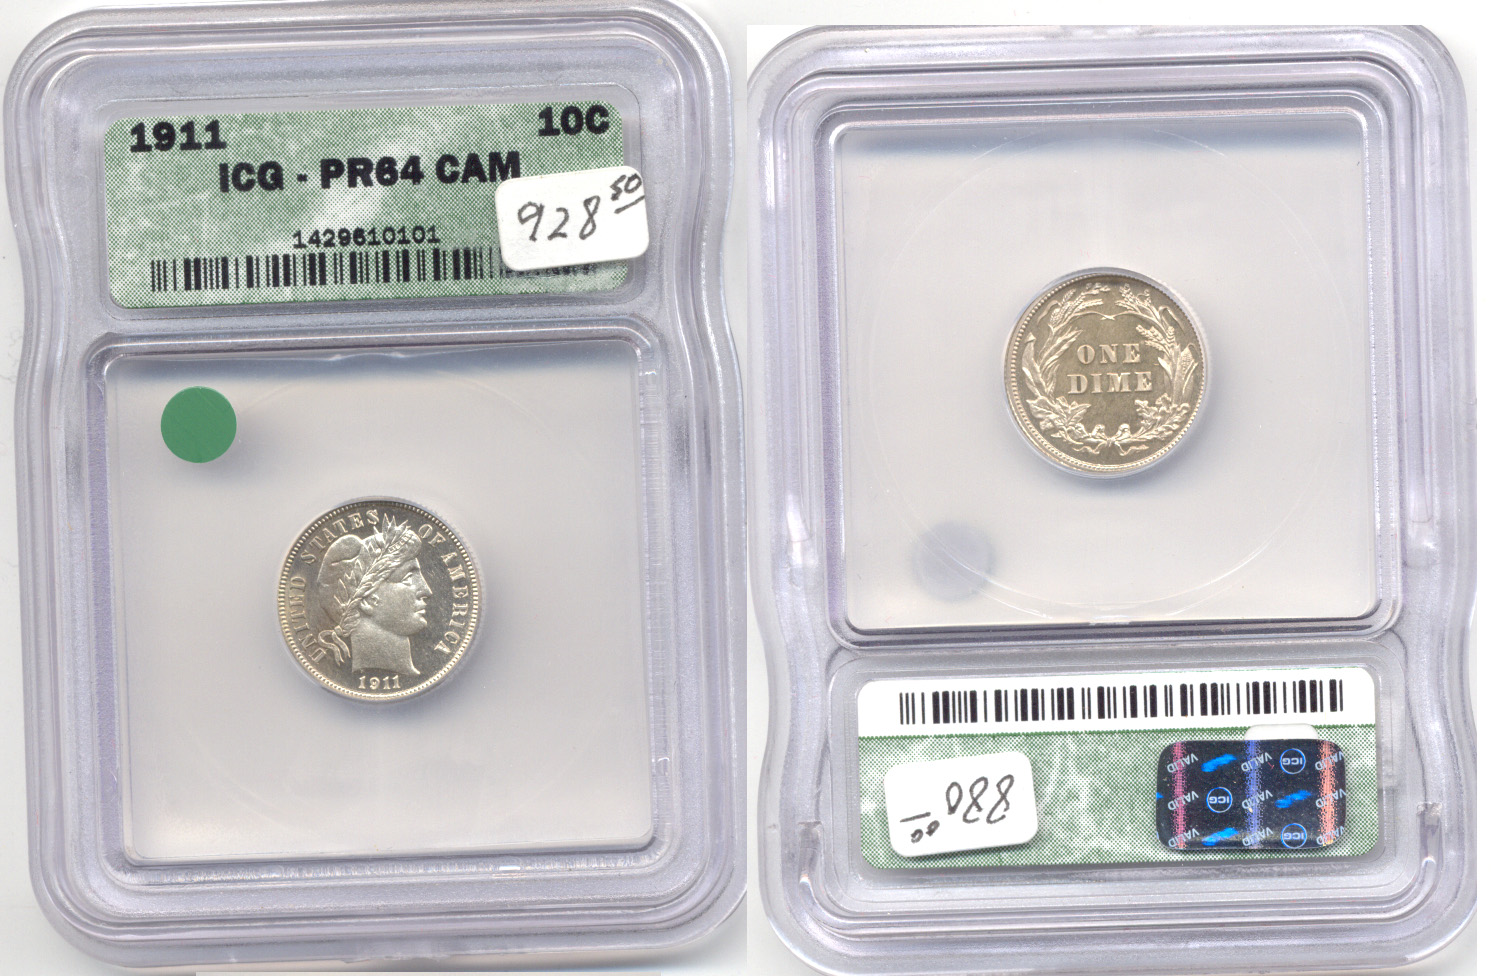 1911 Barber Dime ICG Cameo Proof-64